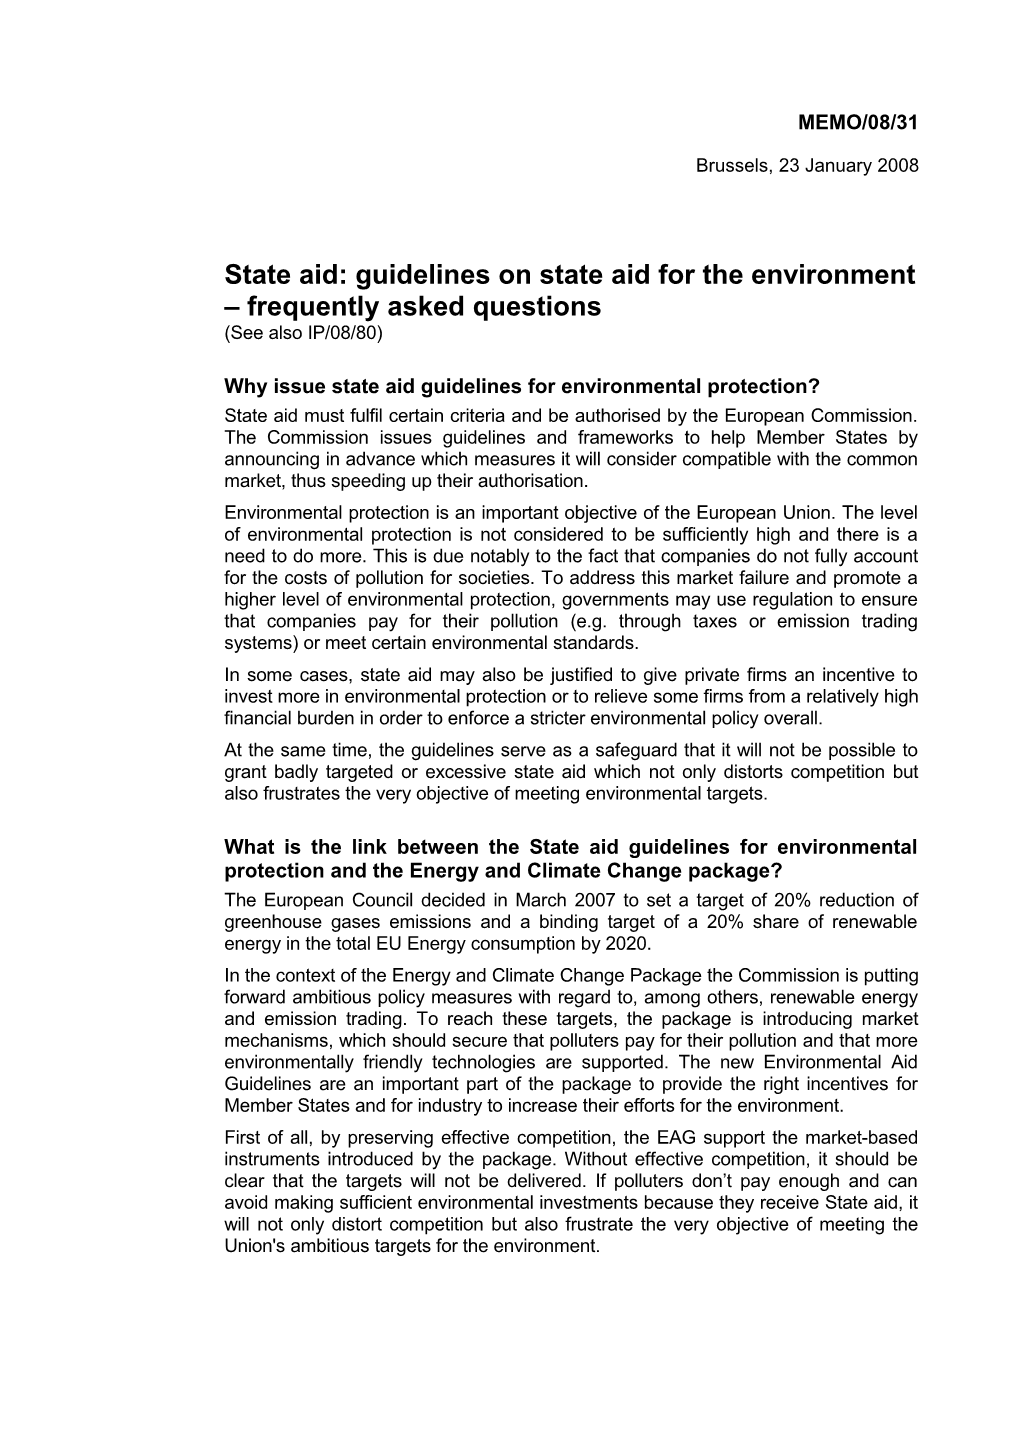 State Aid: Guidelines on State Aid for the Environment Frequently Asked Questions